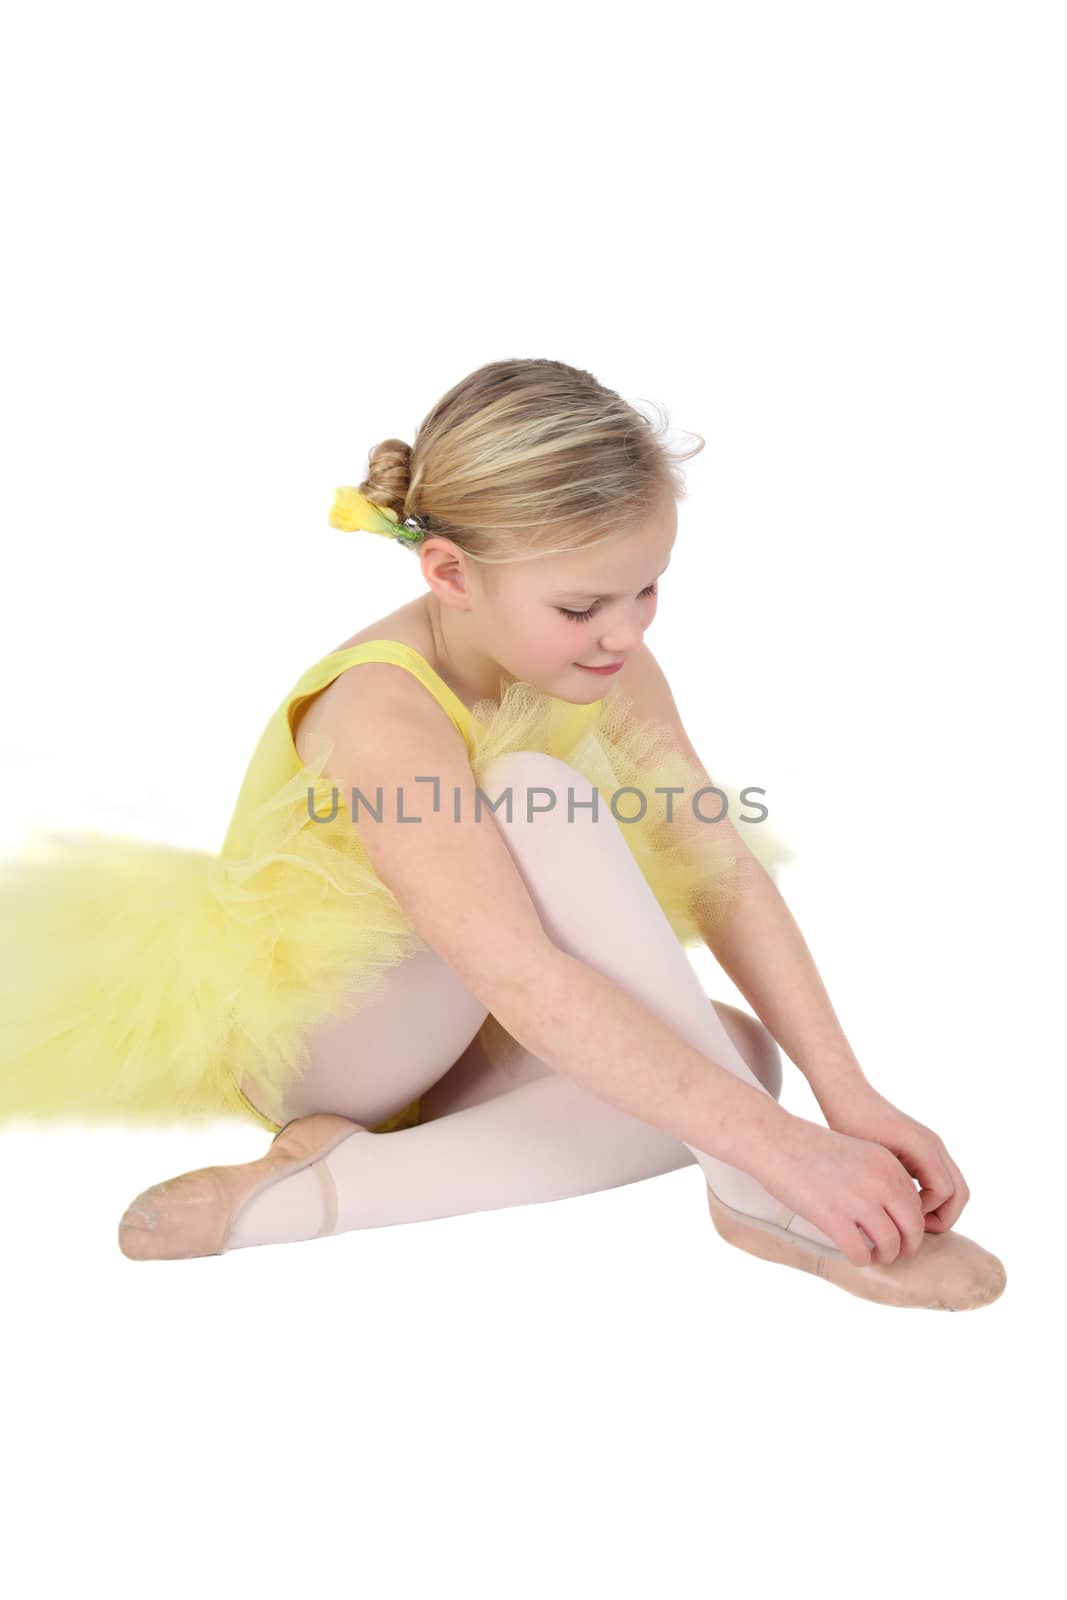 Blond girl wearing a yellow ballet tutu on white background